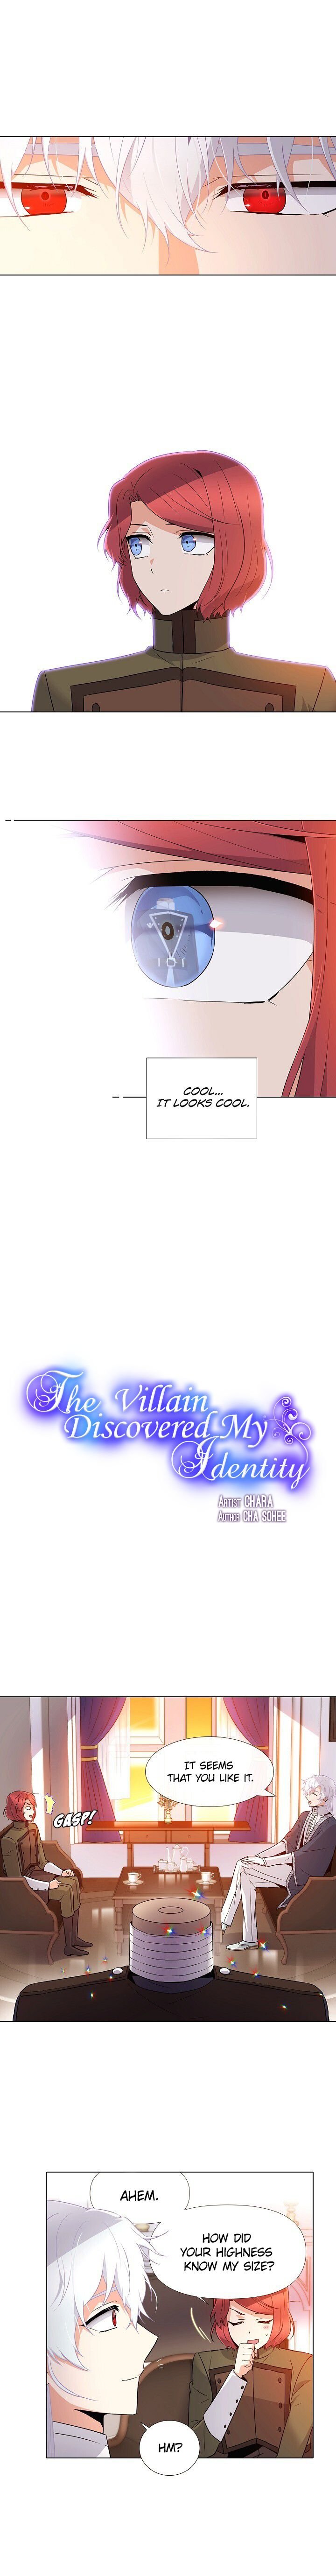 The Villain Discovered My Identity Chapter 15 - Page 3